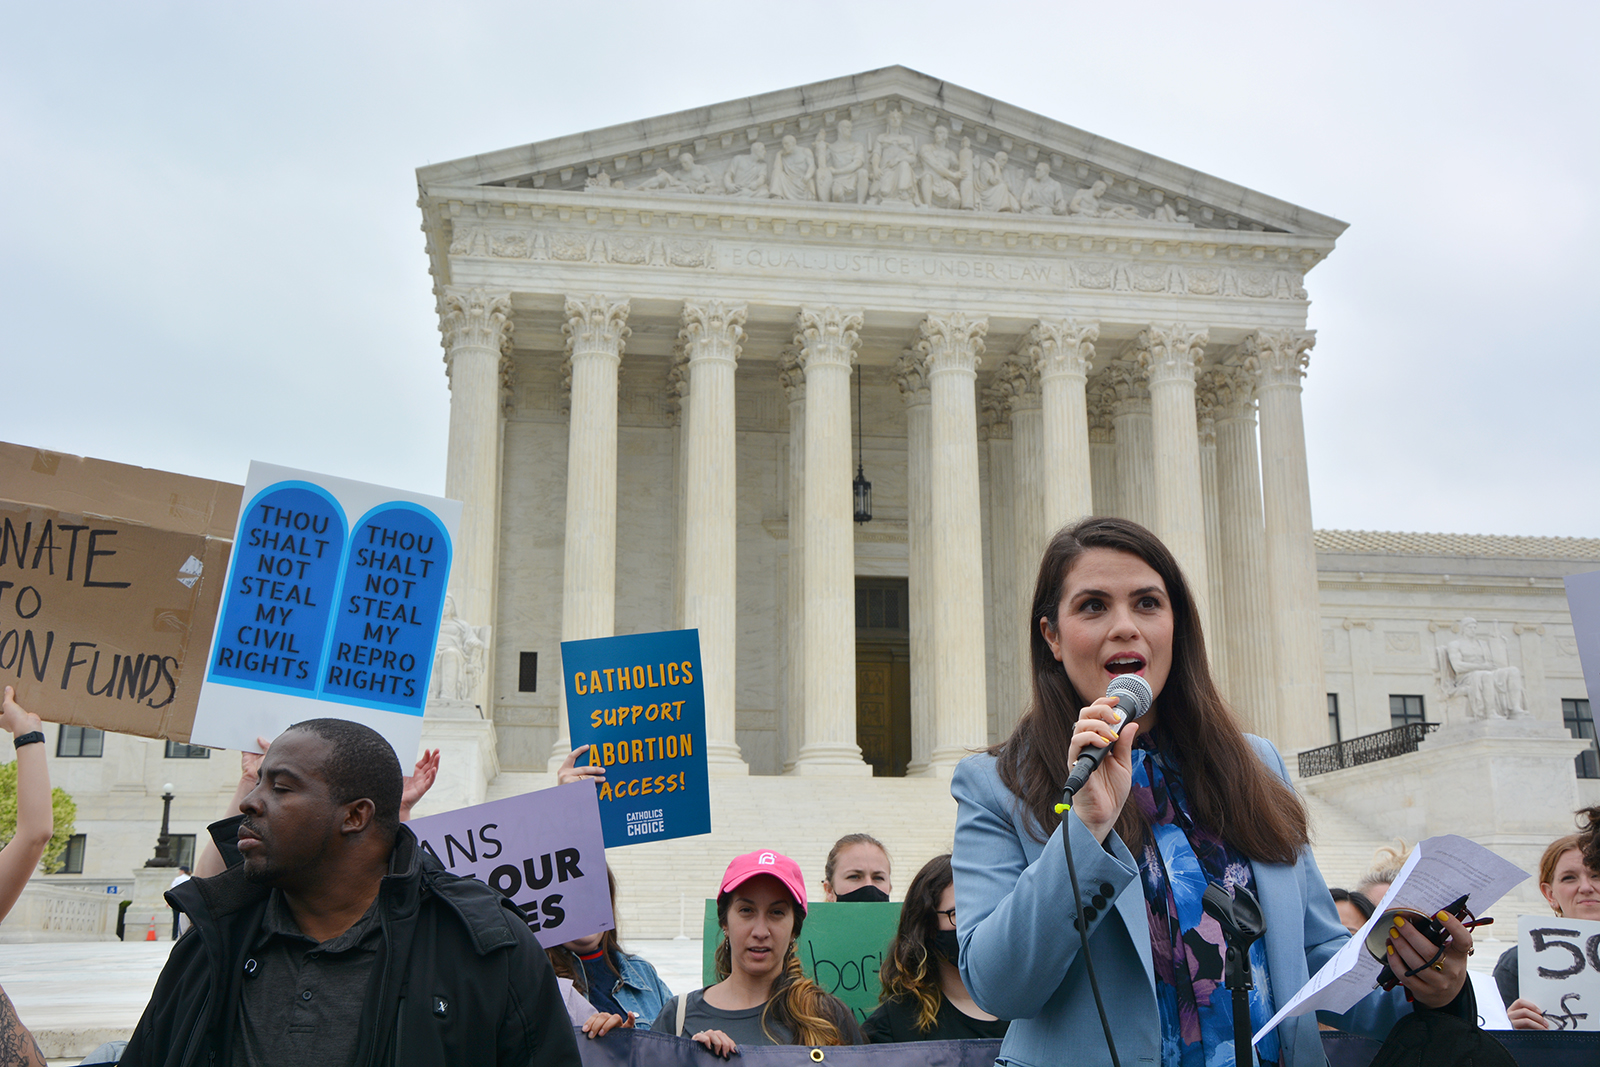 Sheila Katz, of the National Council of Jewish Women, speaks during demonstrations in front of the Supreme Court, Tuesday, May 3, 2022, in Washington. RNS photo by Jack Jenkins